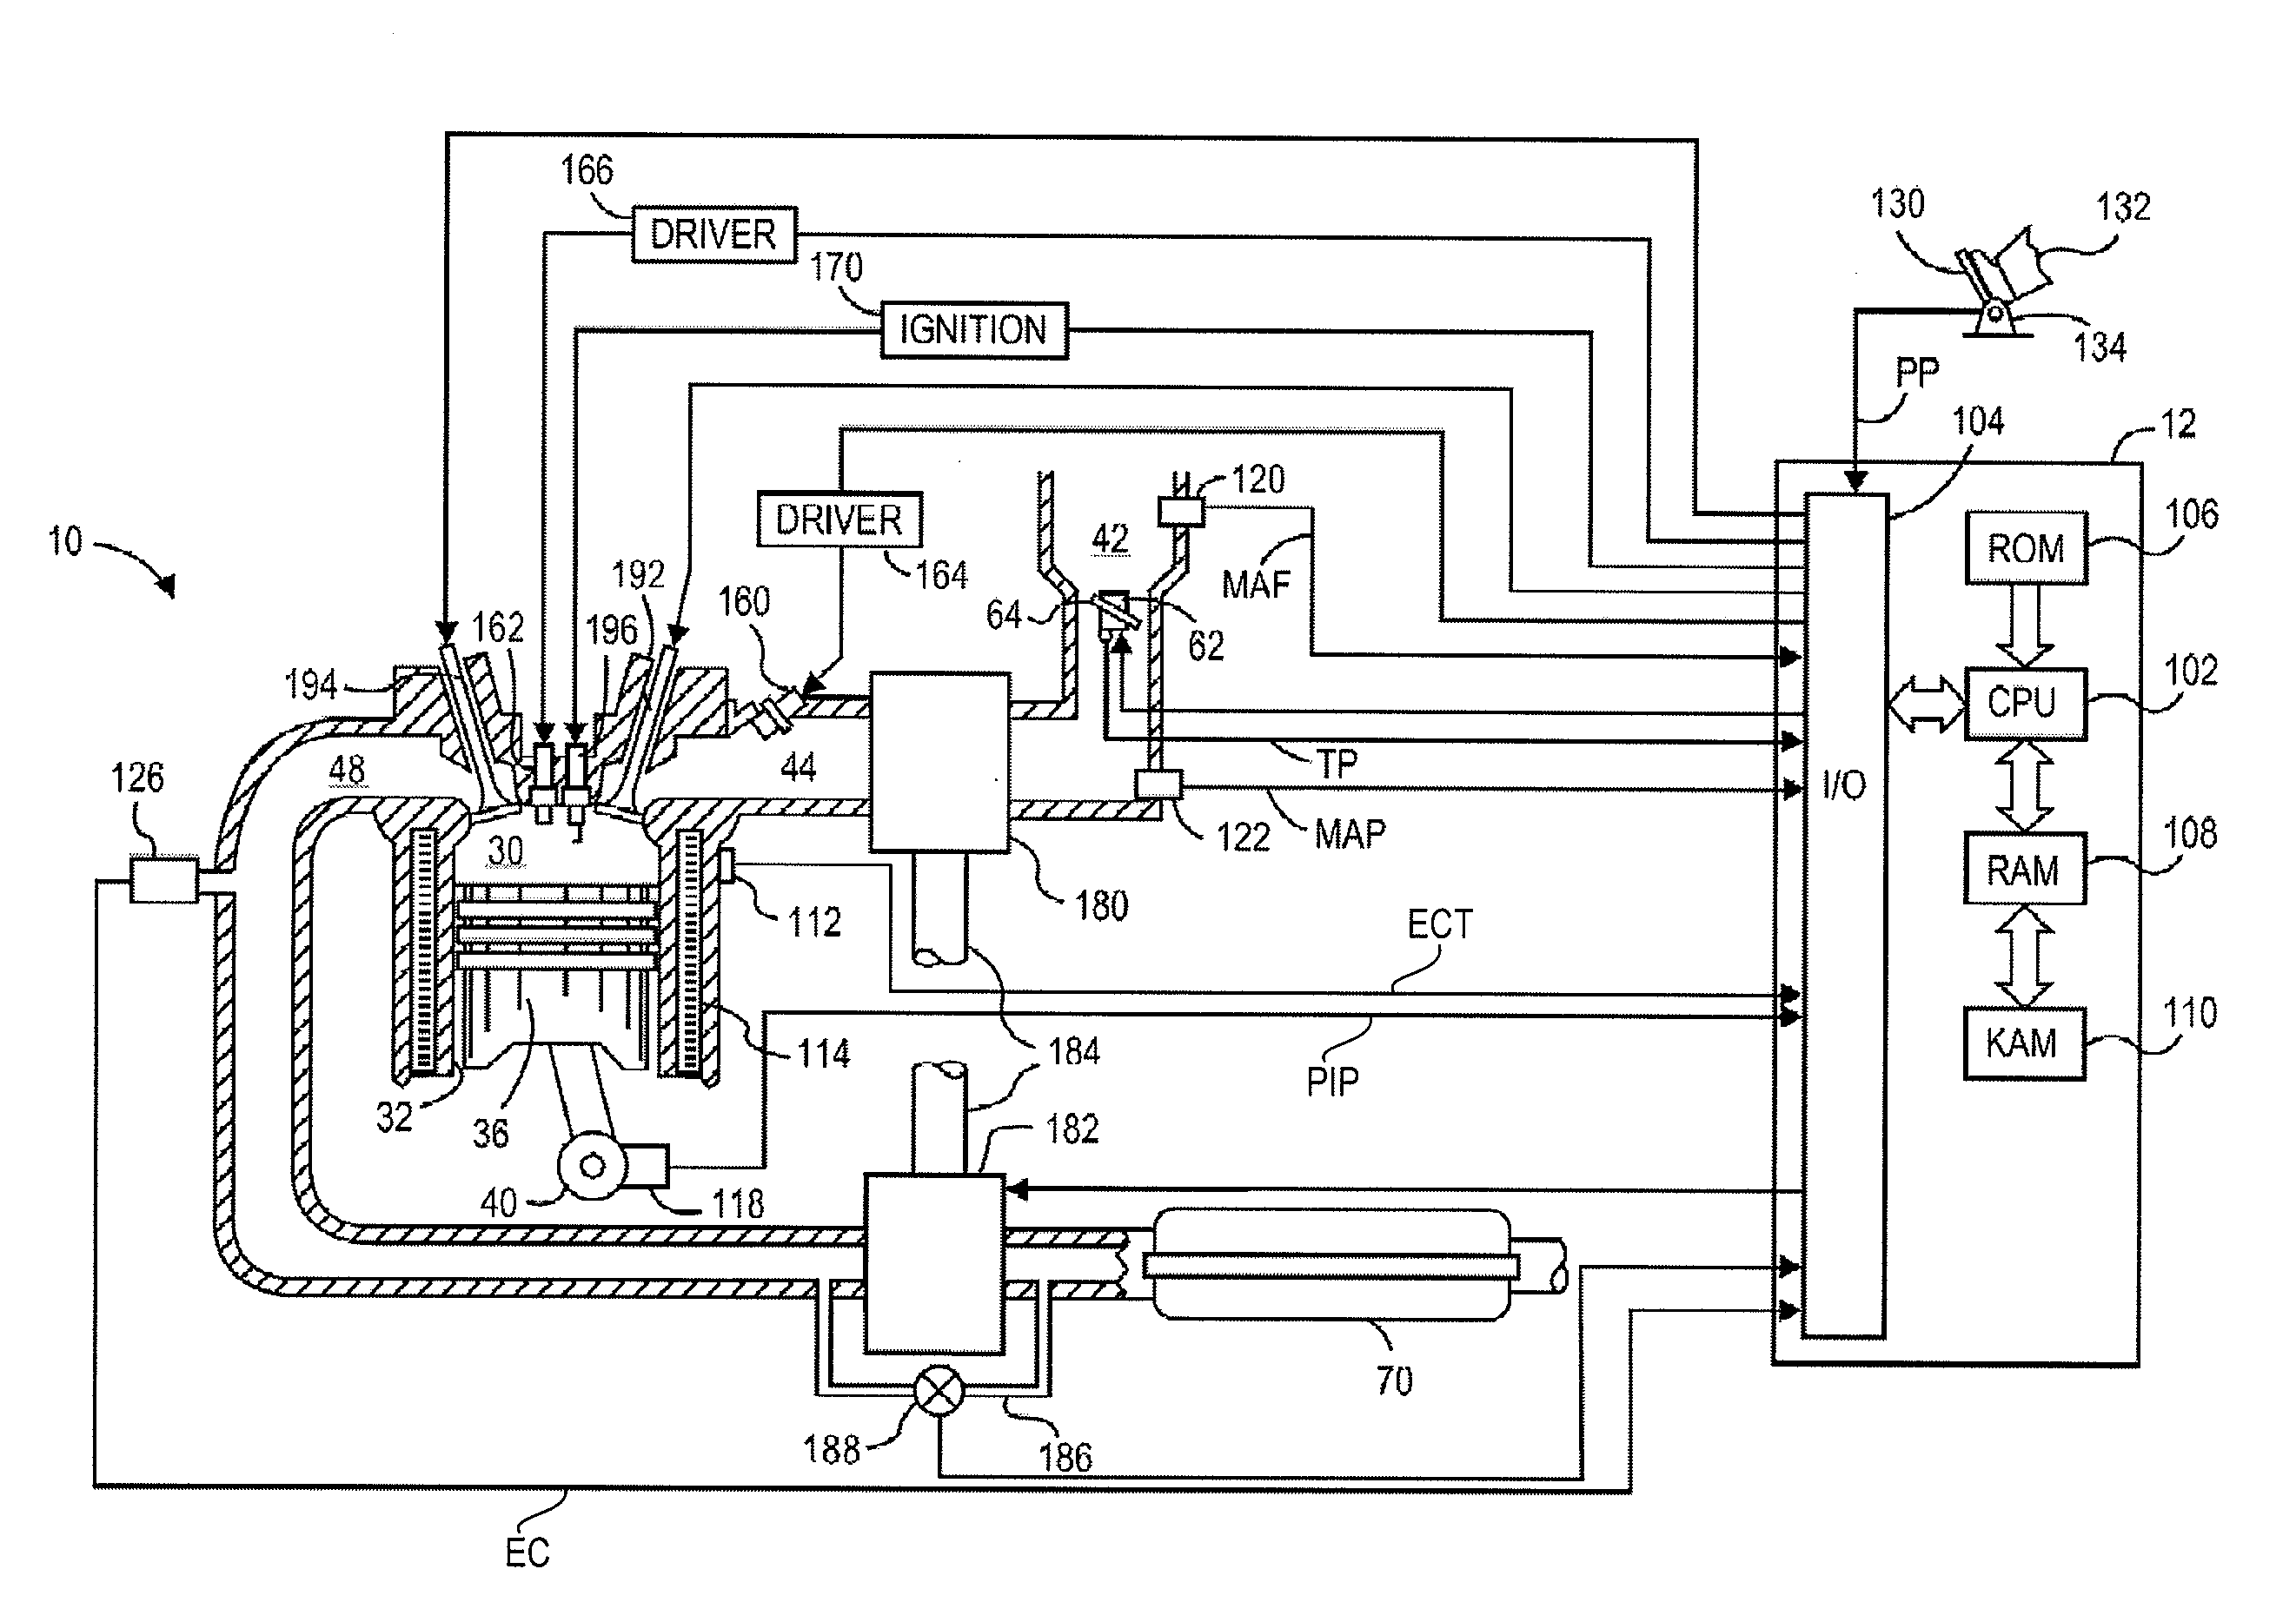 Engine boost control for multi-fuel engine